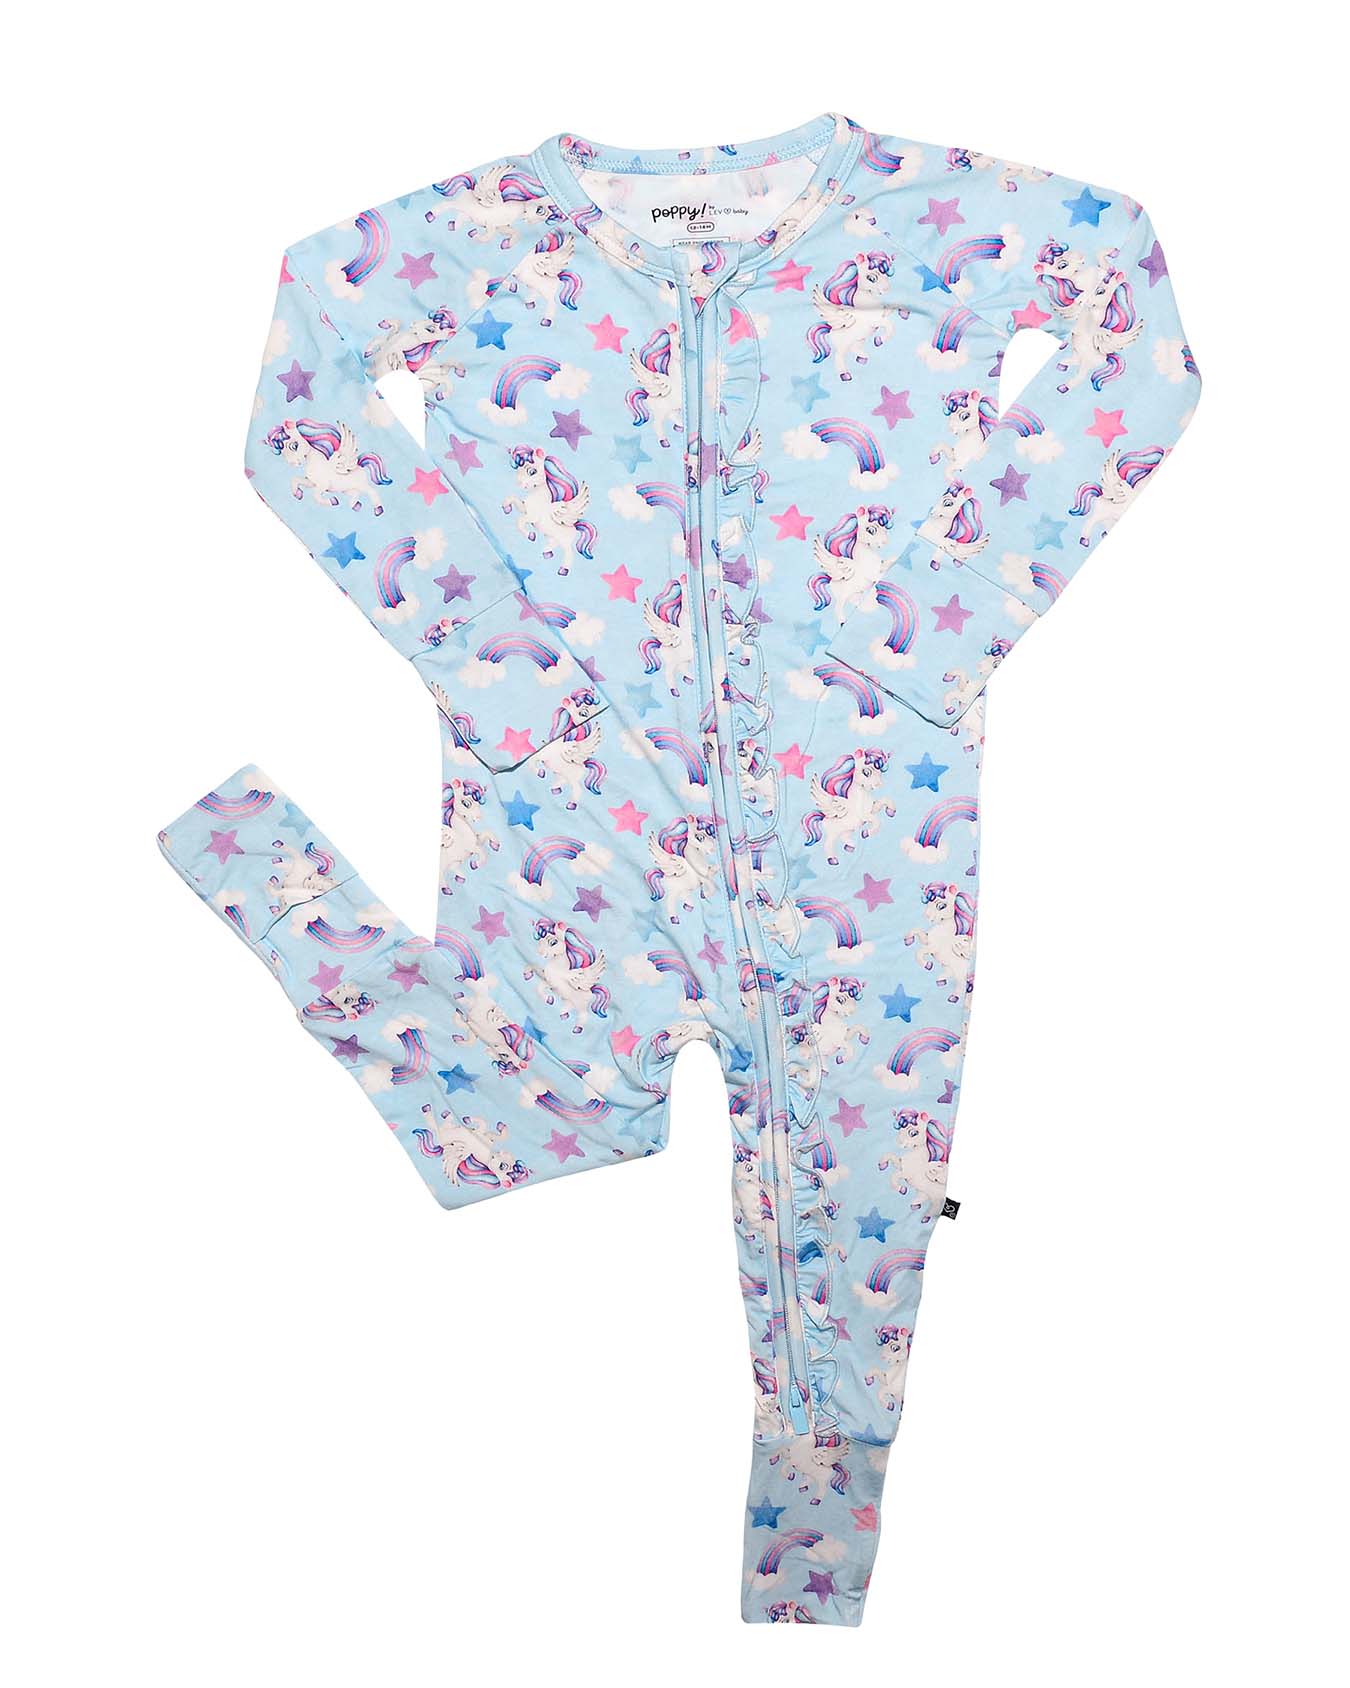 Lev Baby ‘Poppy’™: The Convertible Romper from Hannah Collection